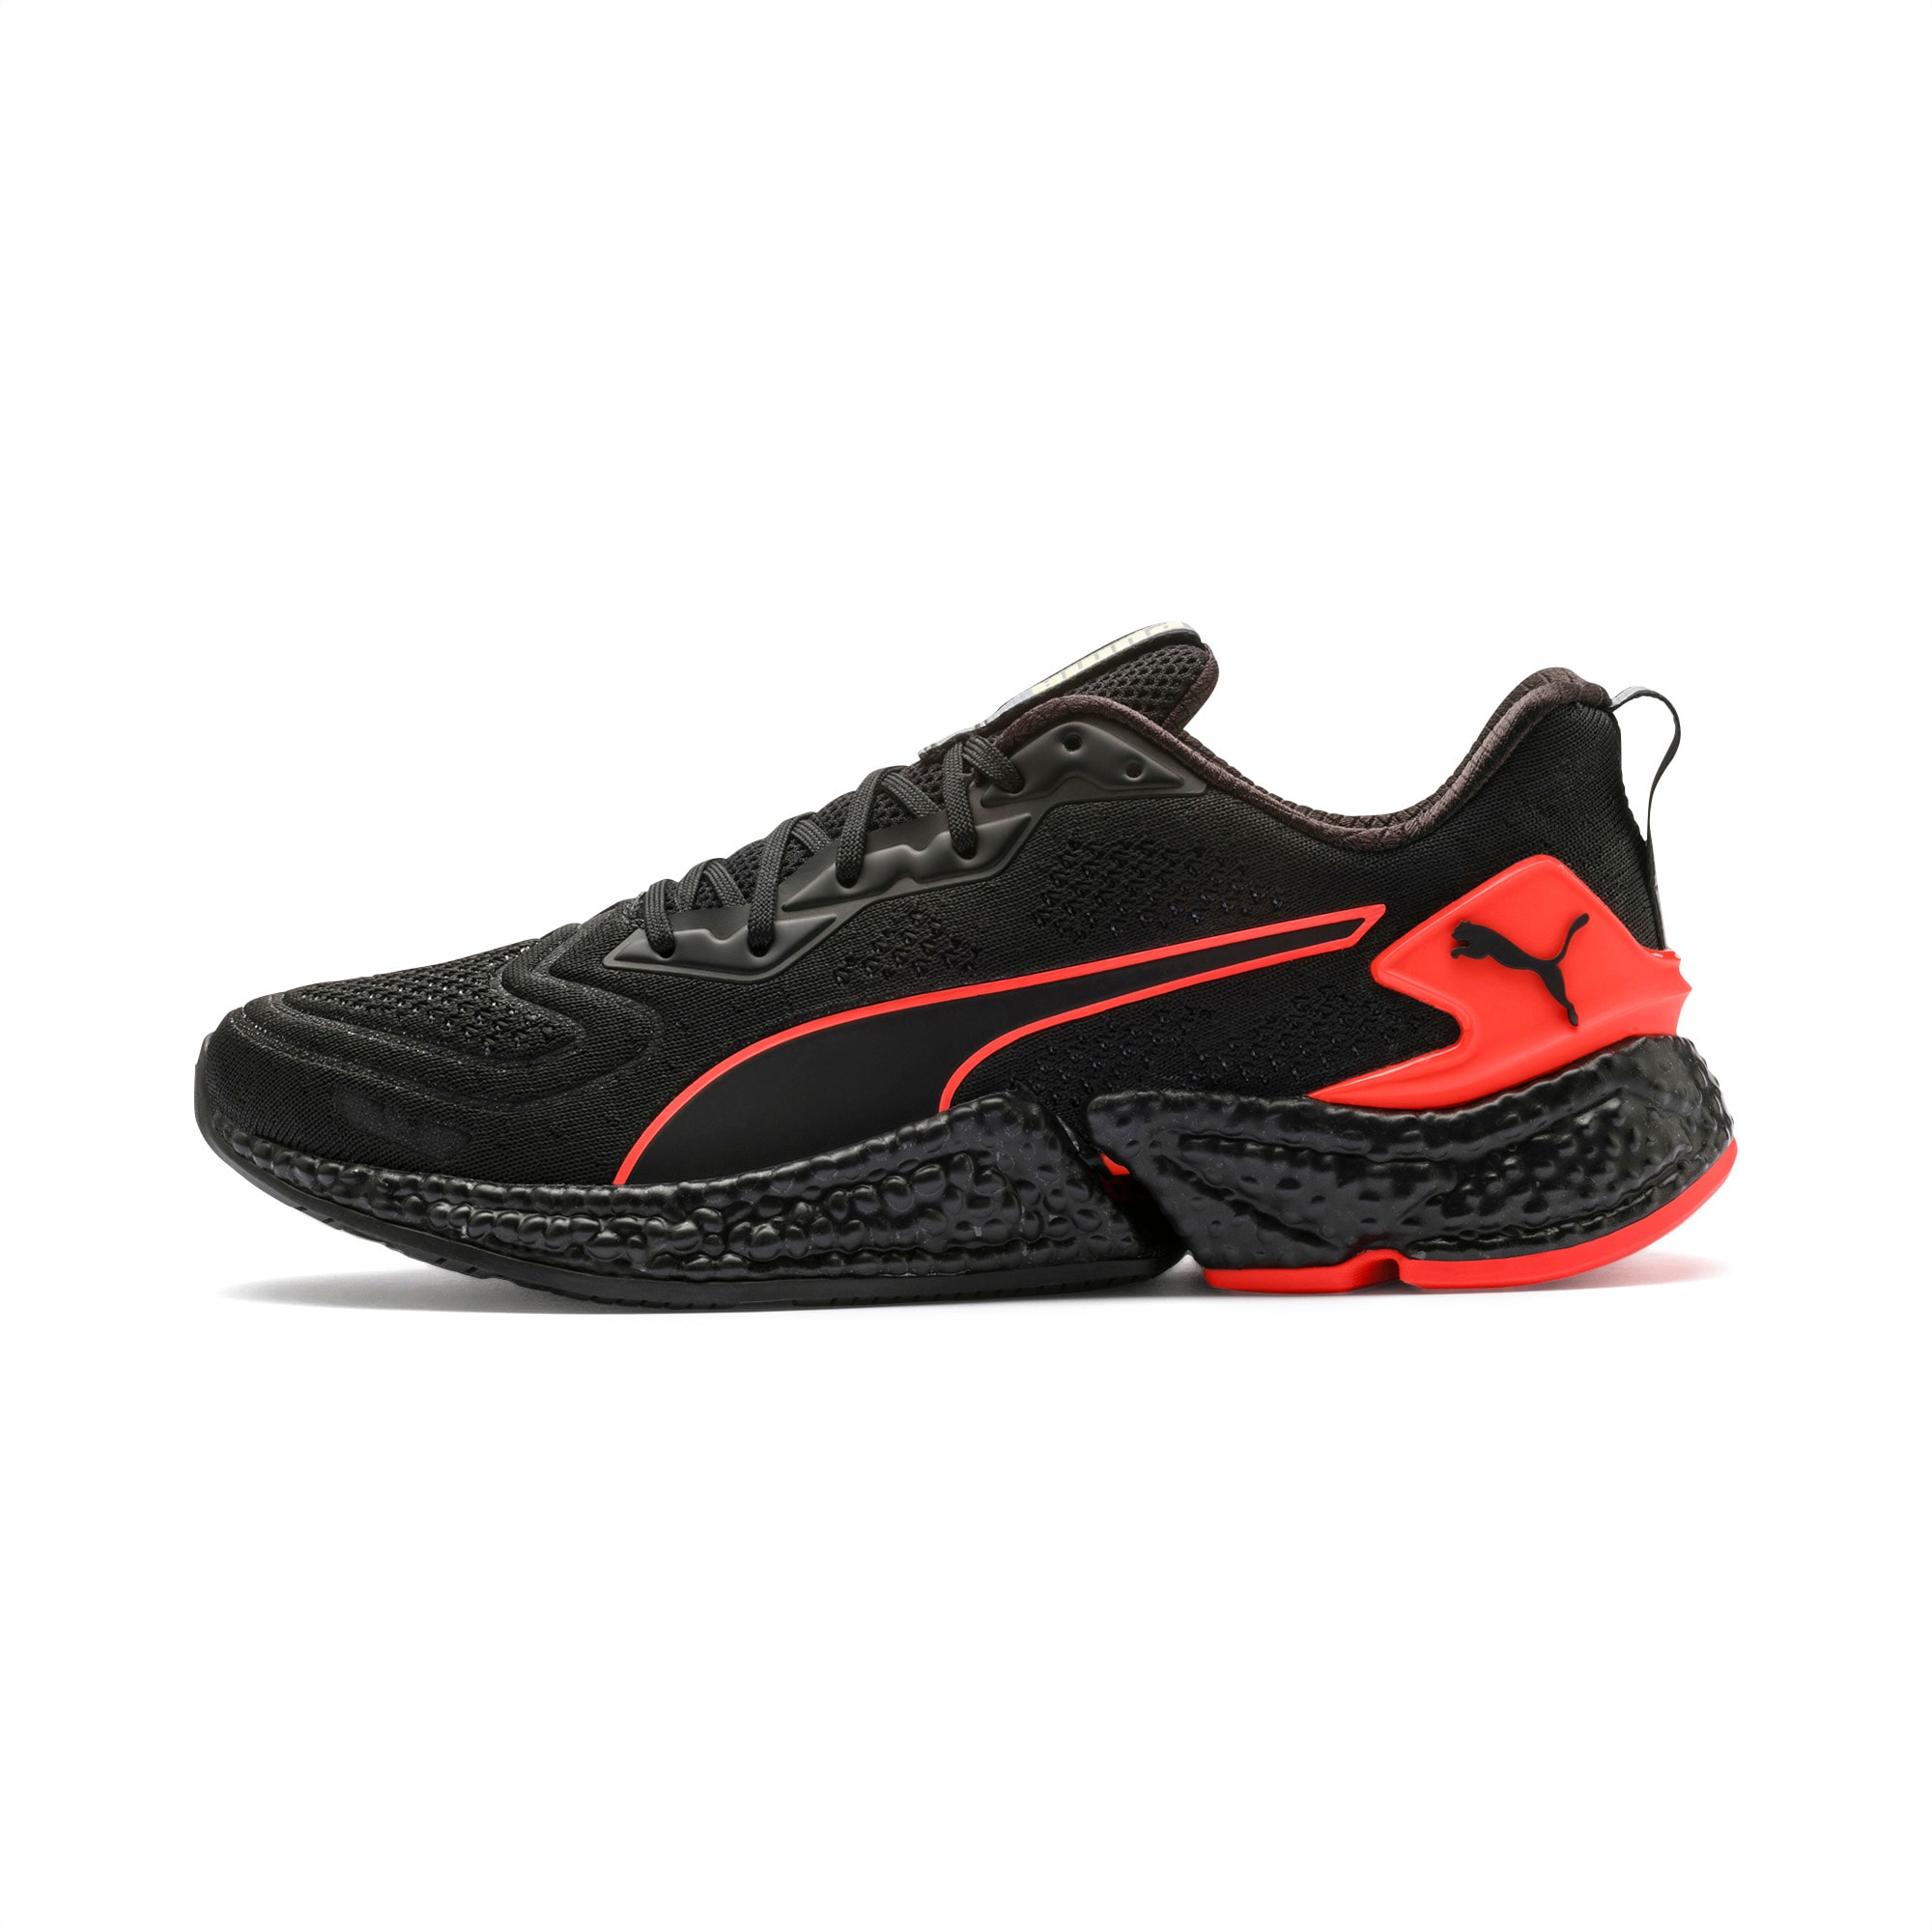 Running Shoes | Black-Nrgy Red-Yellow 